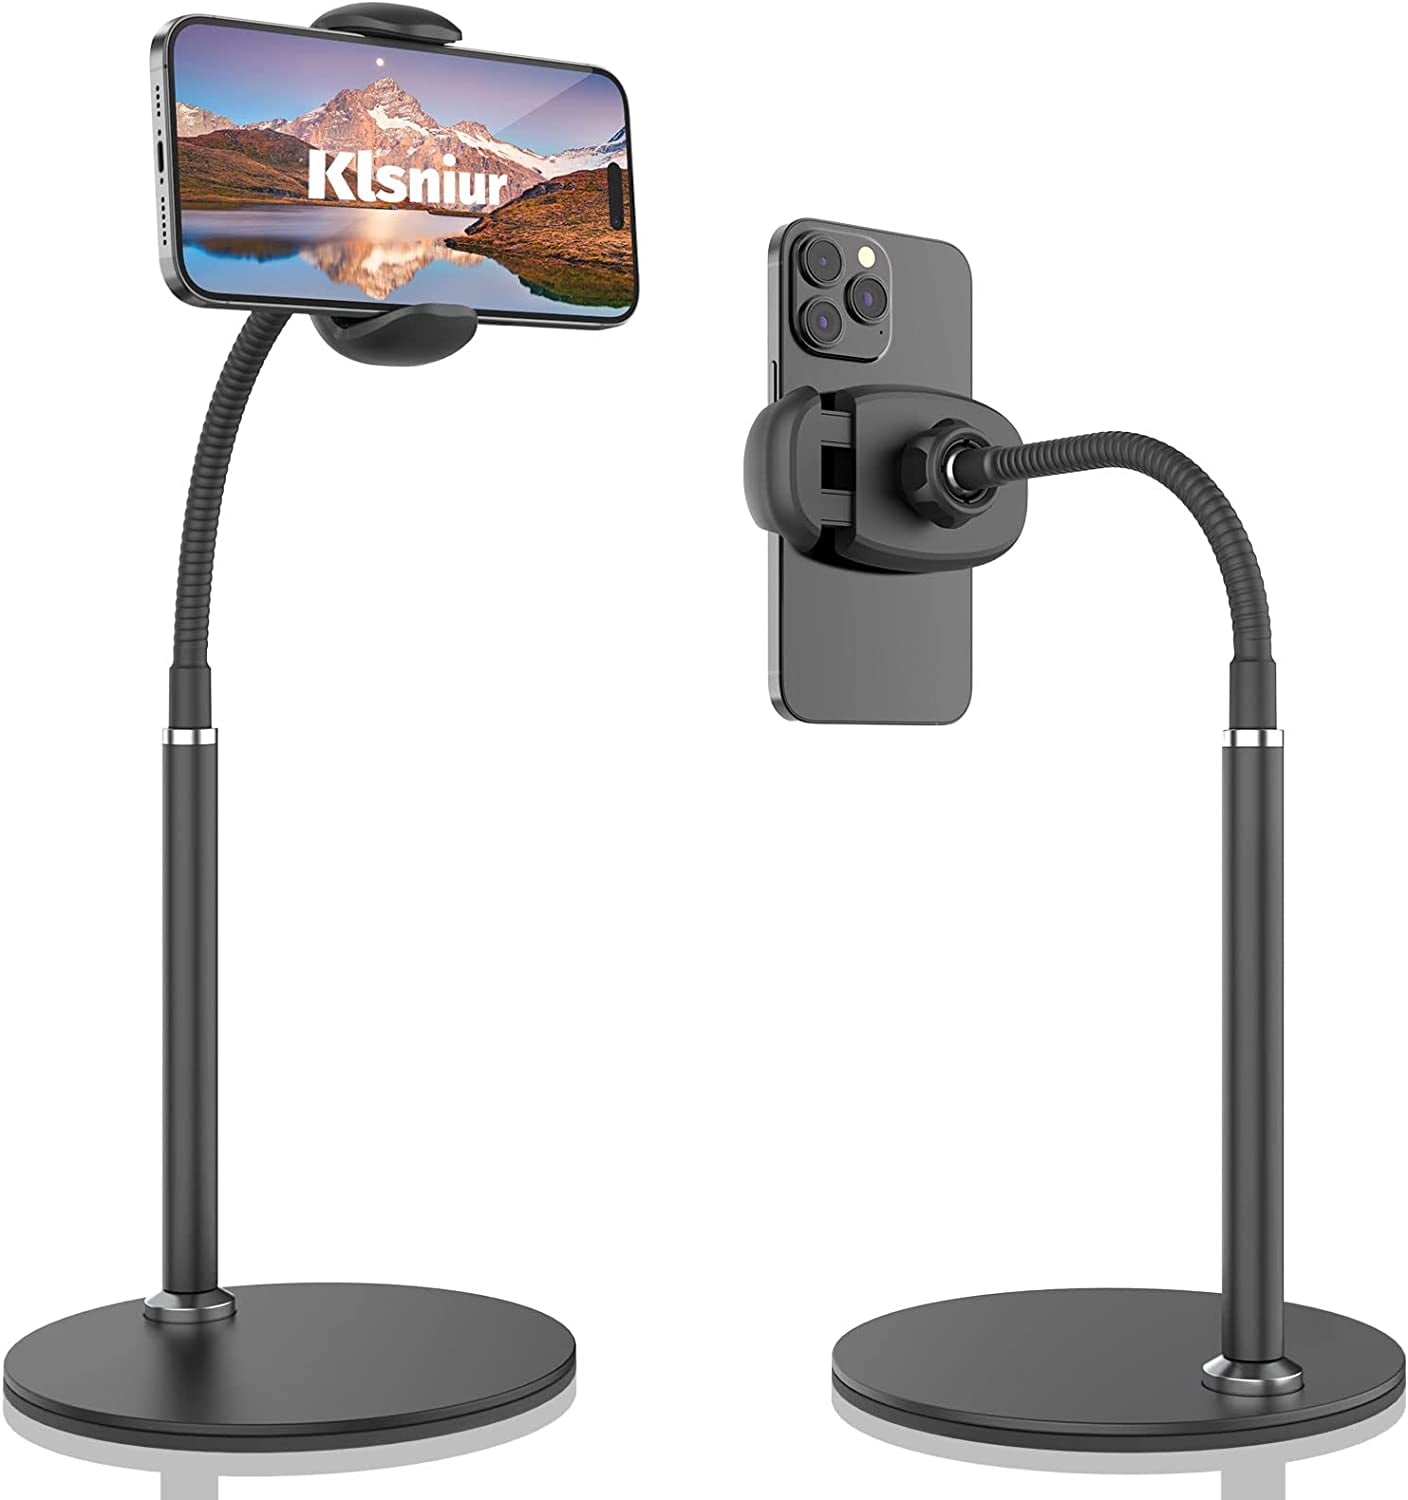 Cell Phone Stand, Adjustable Height & Angle Gooseneck Stand for Desk  Flexible Arm Universal Holder, Aluminum Alloy Desktop Recording Compatible  with